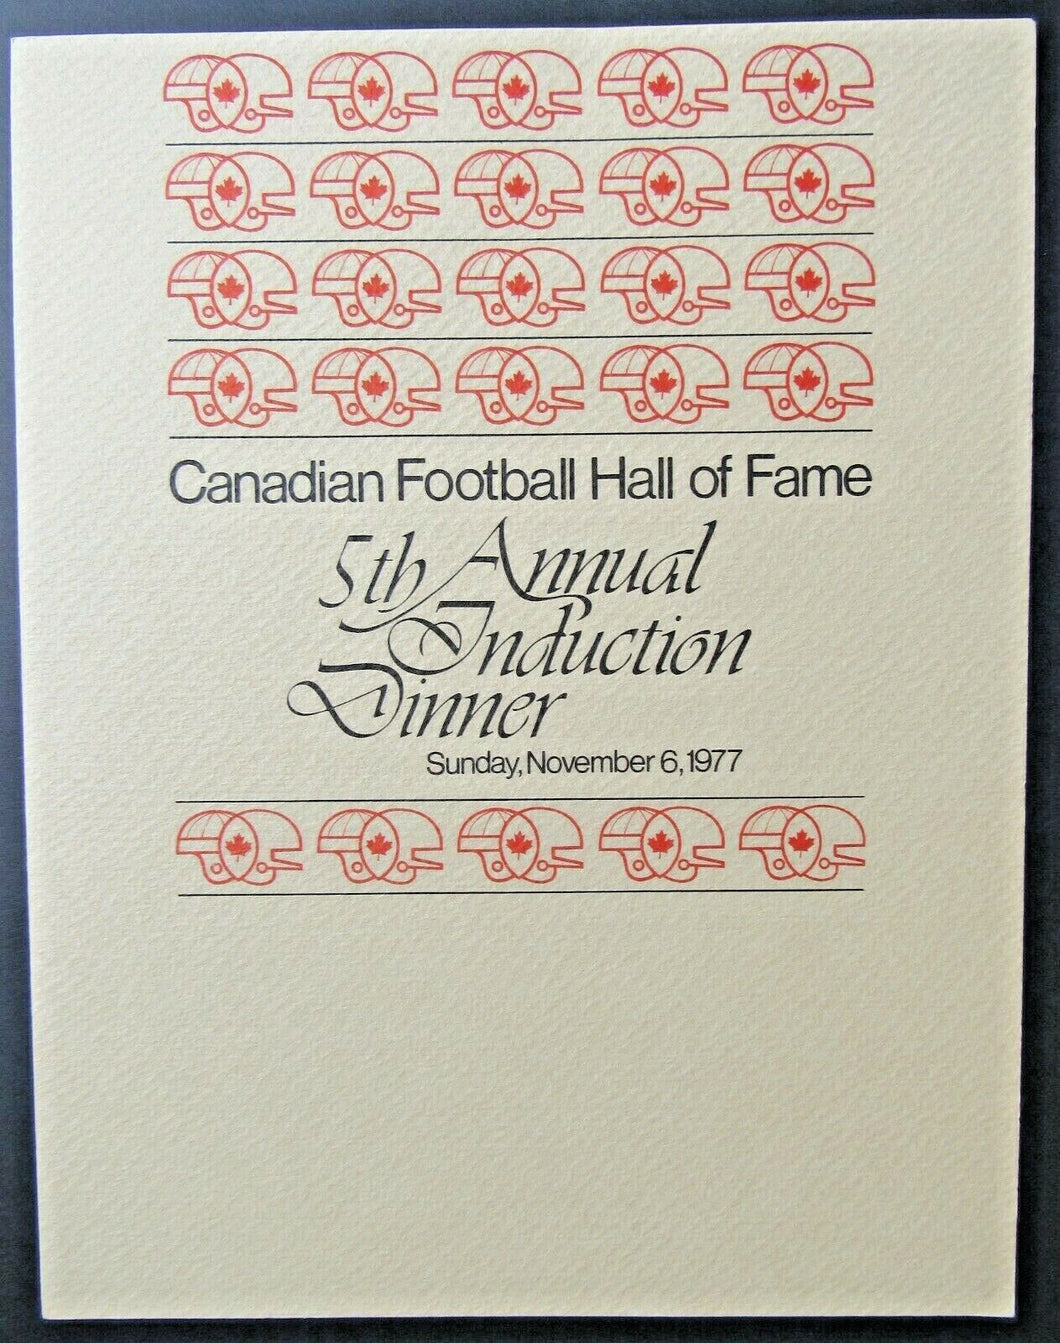 1977 Canadian Football Hall of Fame 5th Annual Induction Dinner Program